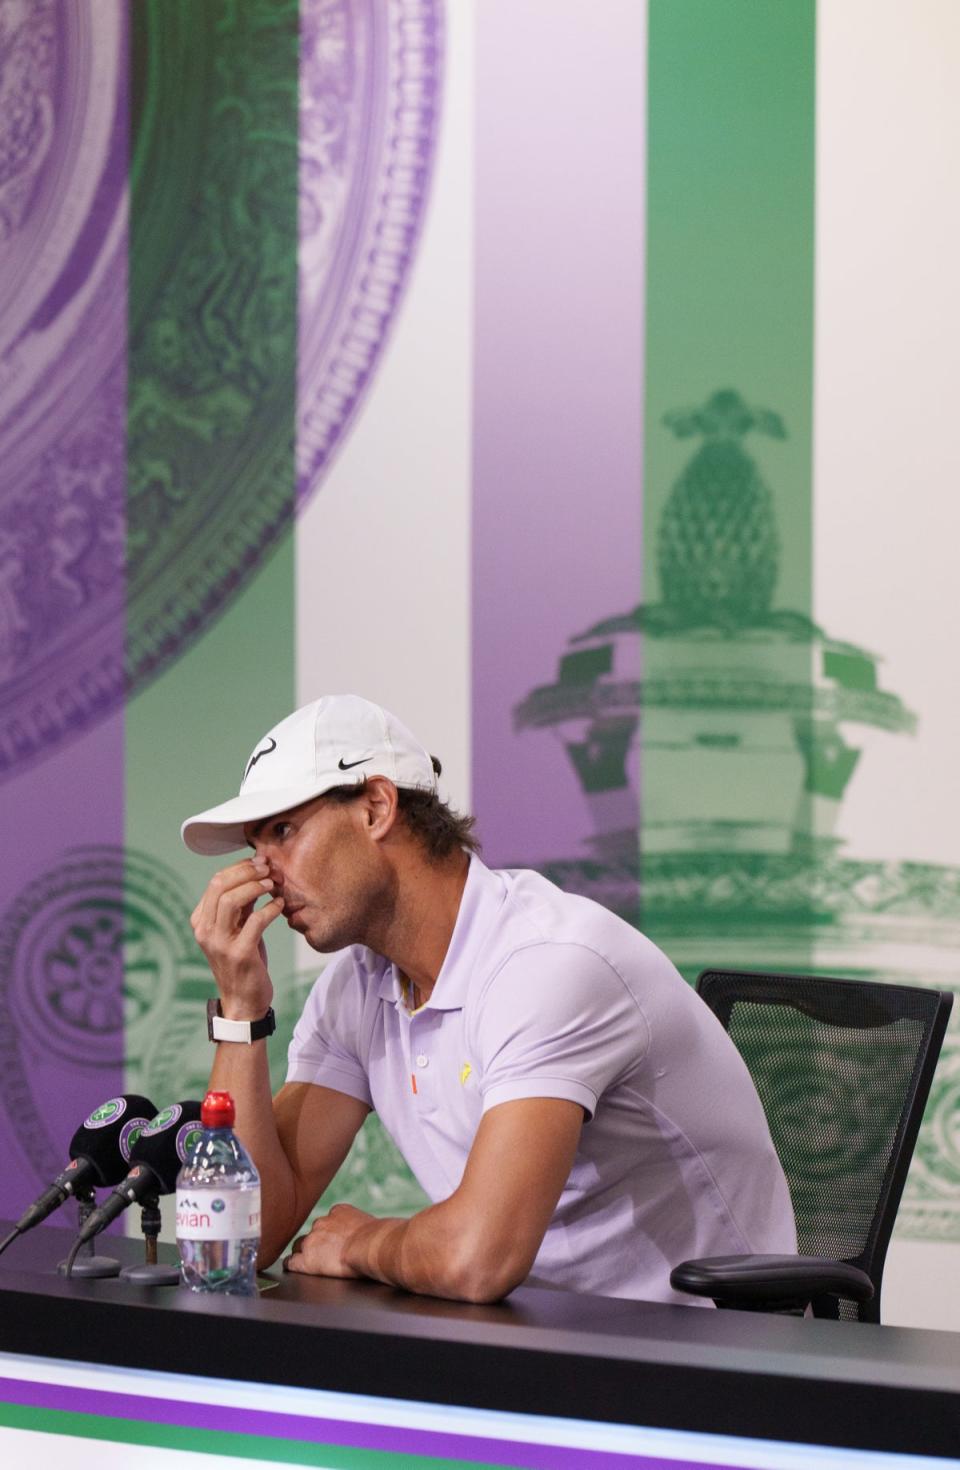 Rafael Nadal announced he had withdrawn from Wimbledon during a press conference on Thursday night (Joe Toth/PA) (PA Wire)